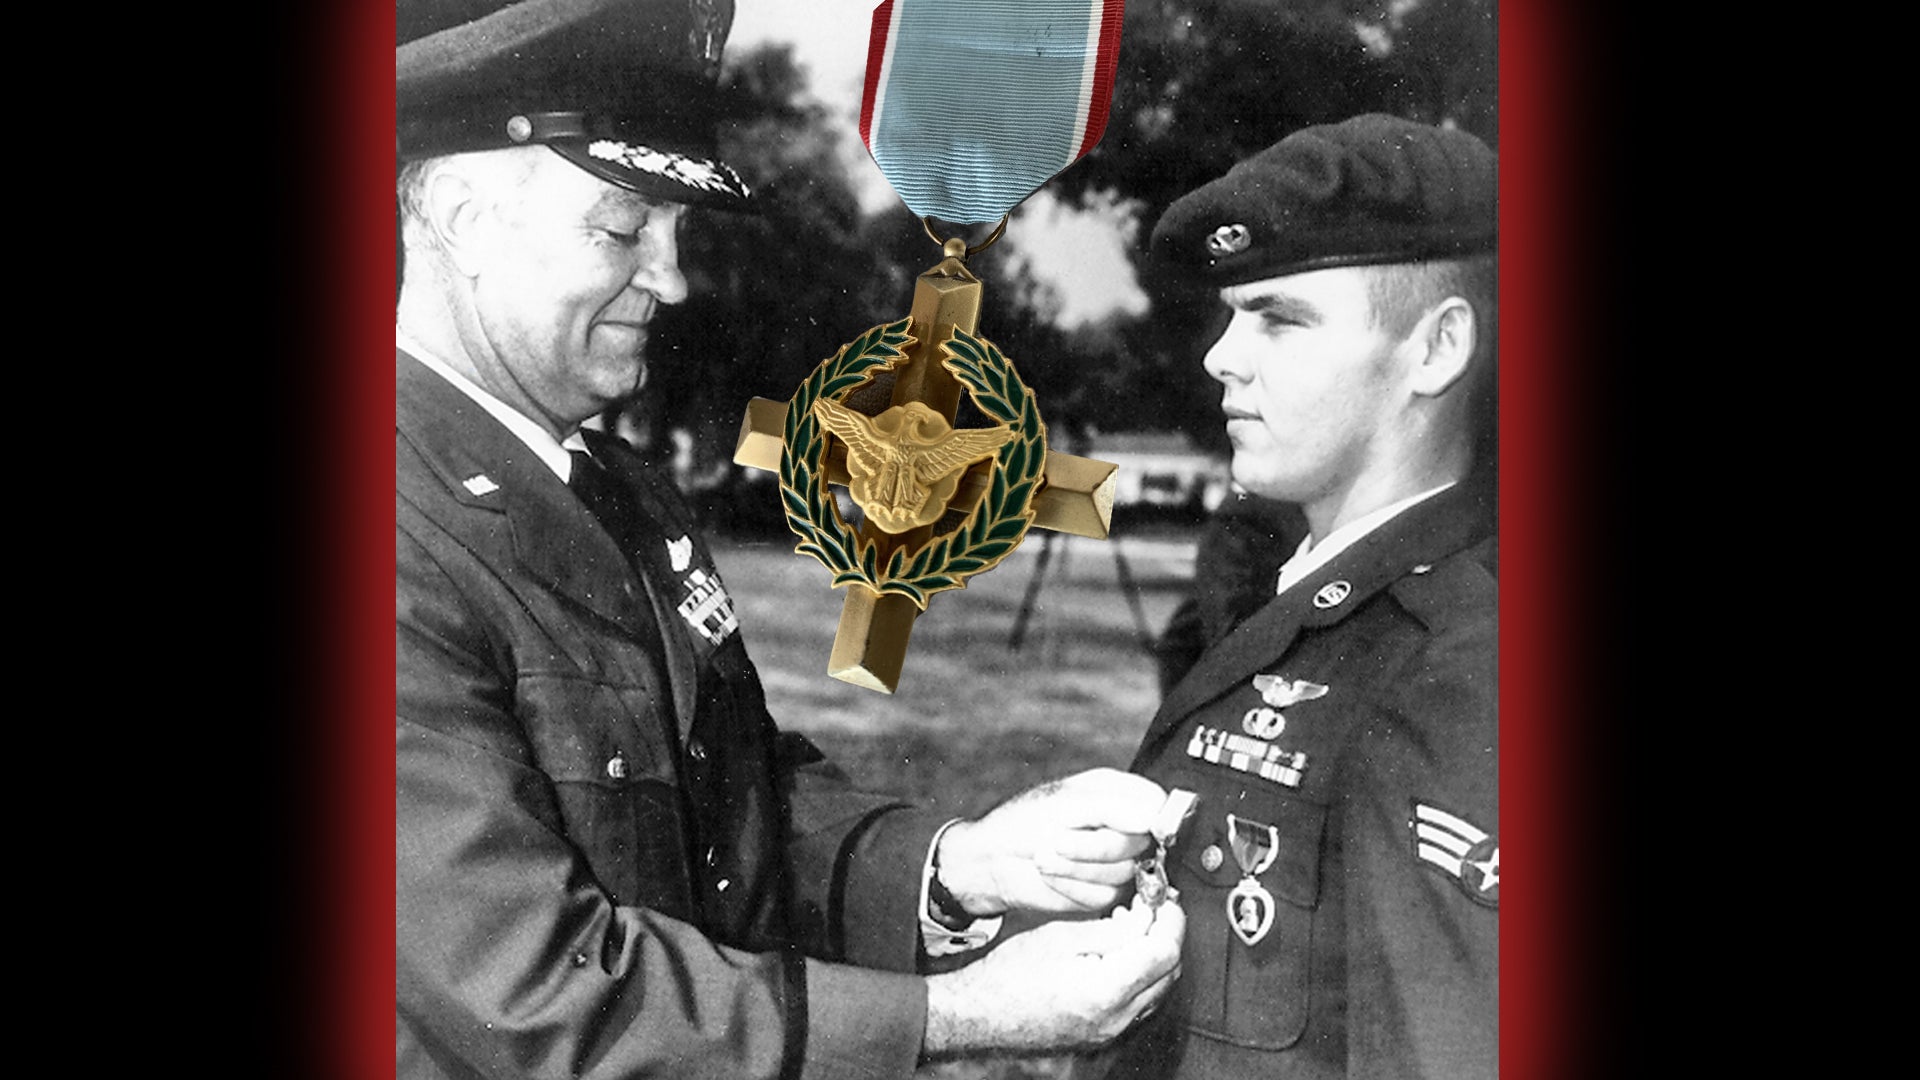 Military Awards photo Survivor Tech A brief history of valor awards in the American military